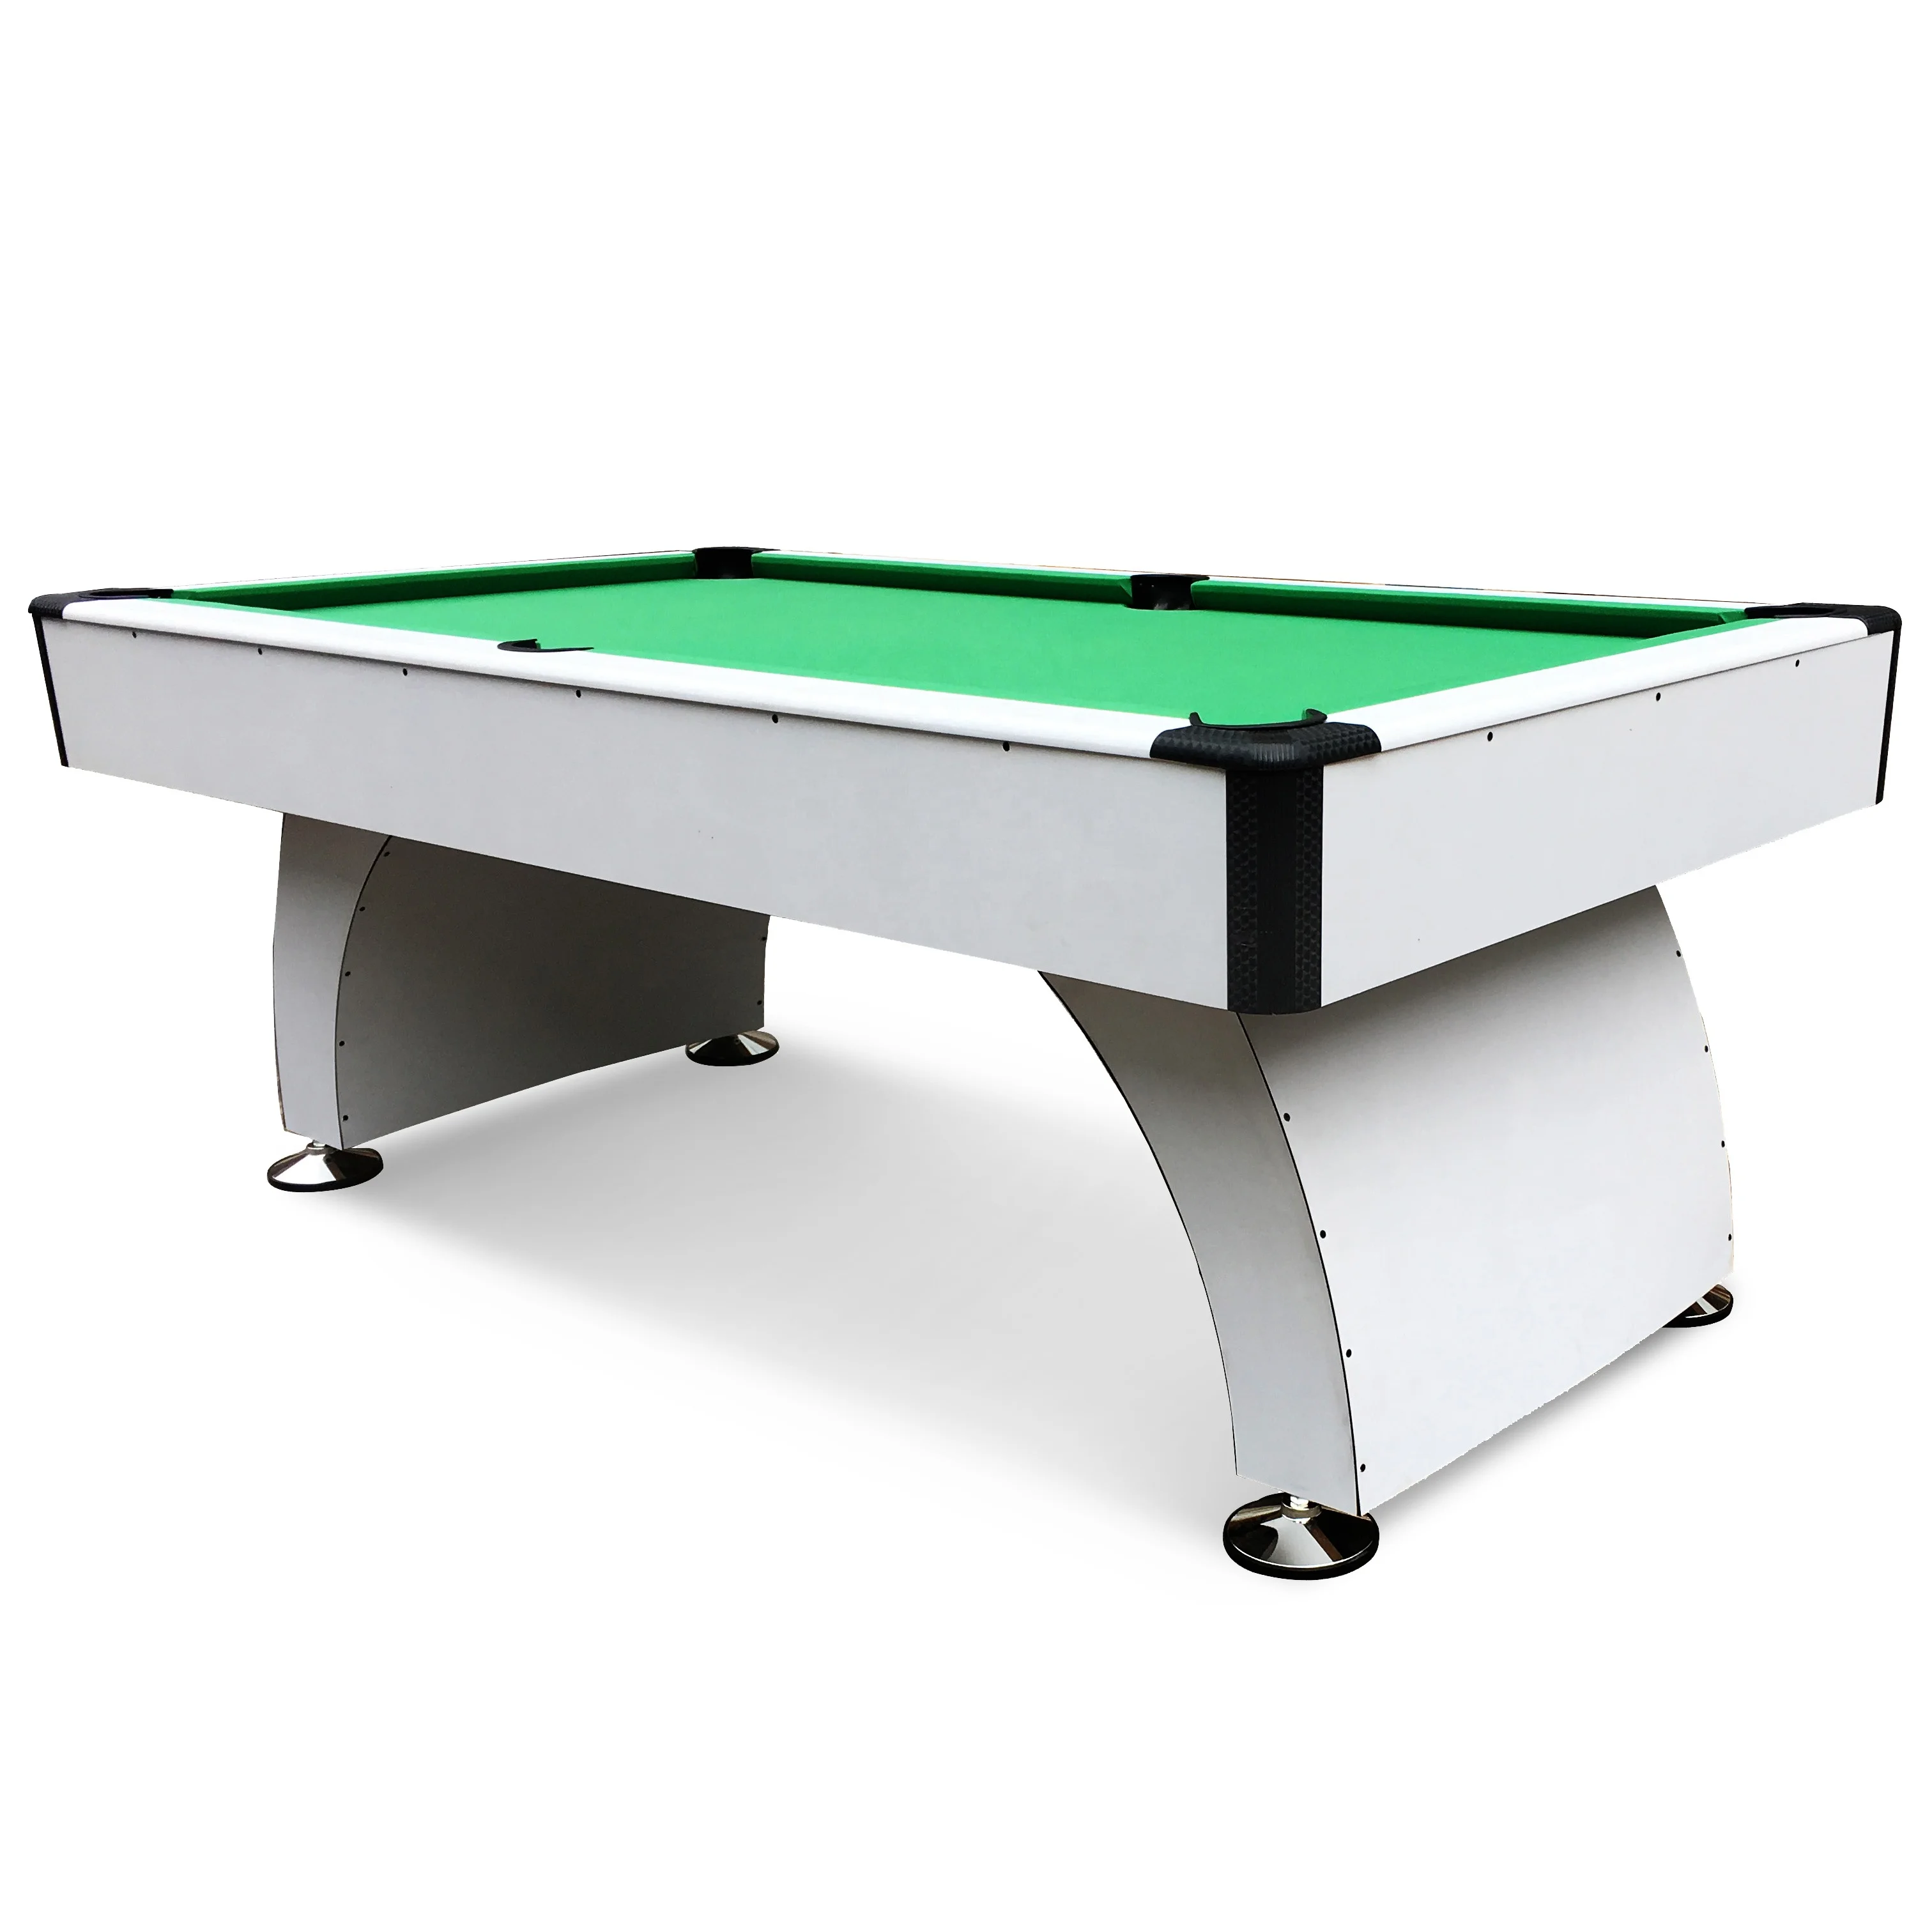 Best Sale Family Play 8 Ball Pool Table 6ft Price View Black 8 Pool Table H J Product Details From Guangzhou H J Sport Products Co Ltd On Alibaba Com